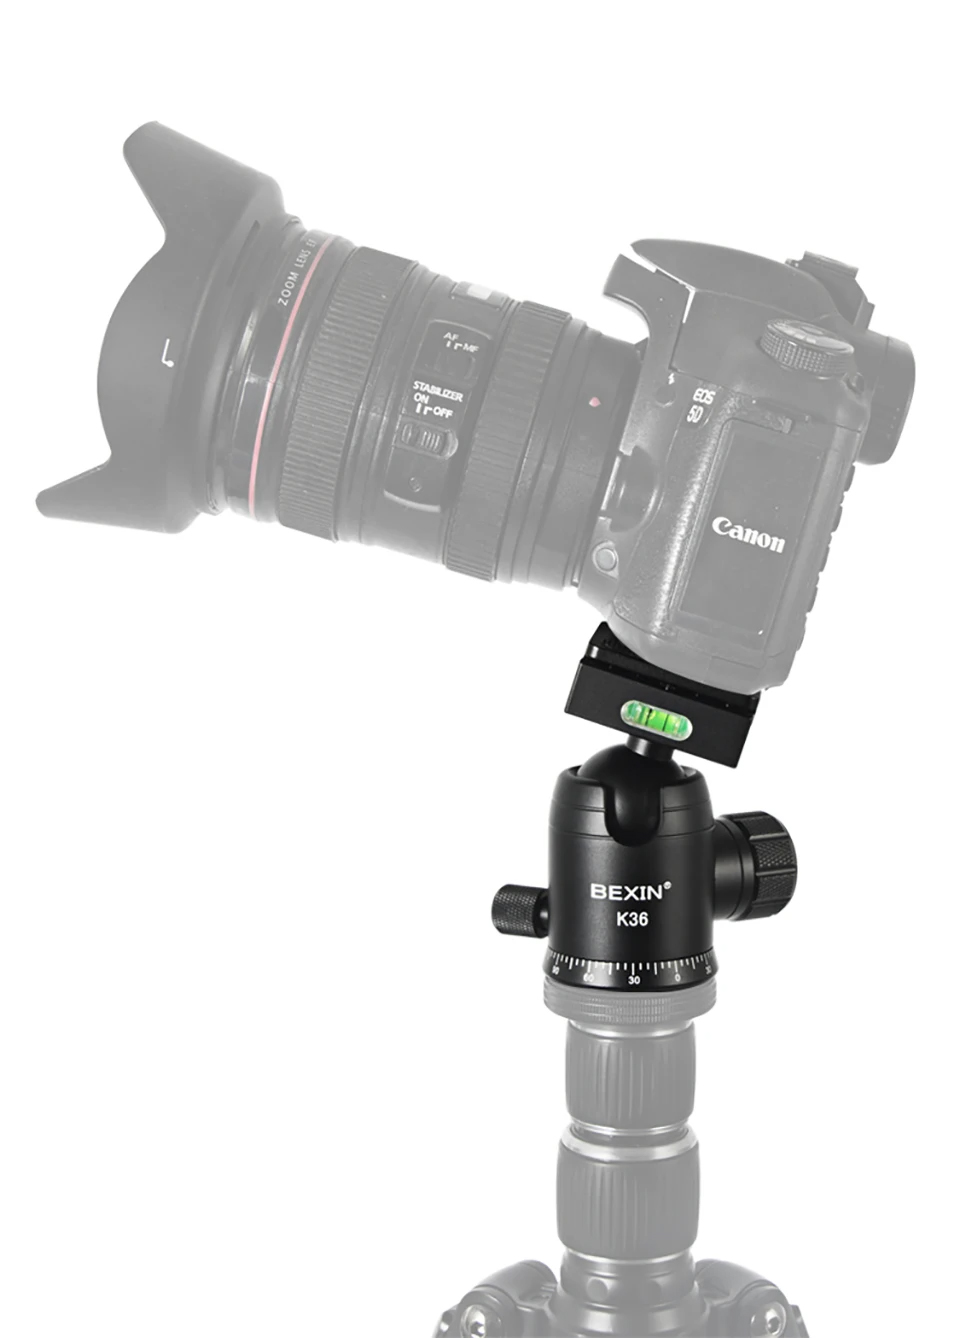 BEXIN K36 Panoramic Ball Head 360 Degree Rotation with Damping for SLR Camera (9)jy7